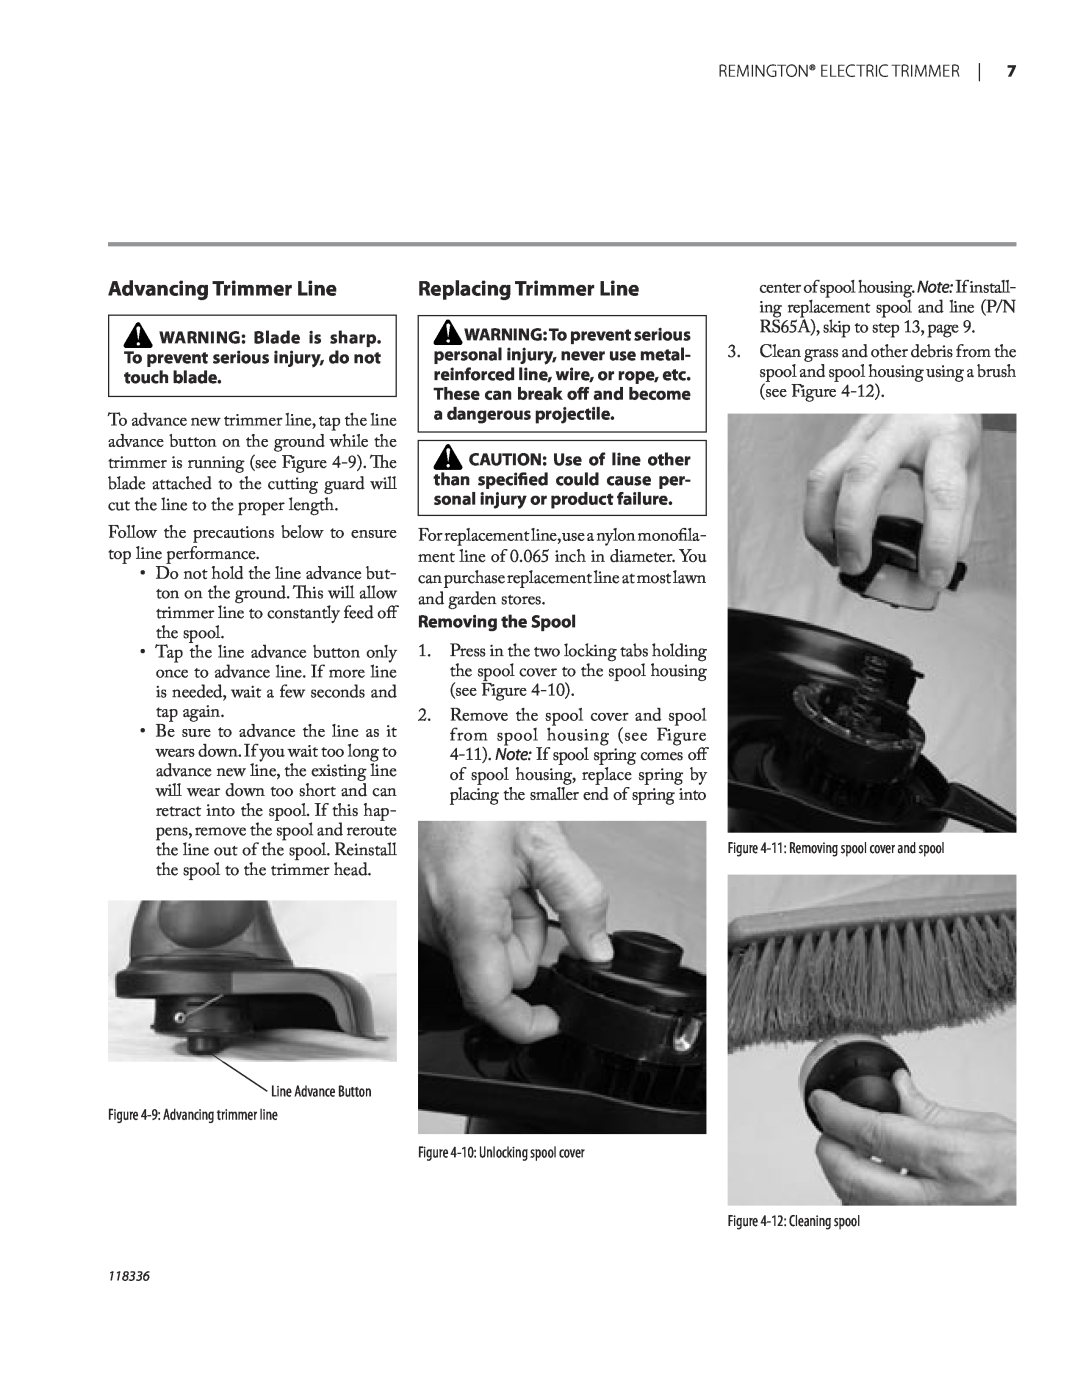 Remington ST3010A owner manual Advancing Trimmer Line, Replacing Trimmer Line, Removing the Spool 